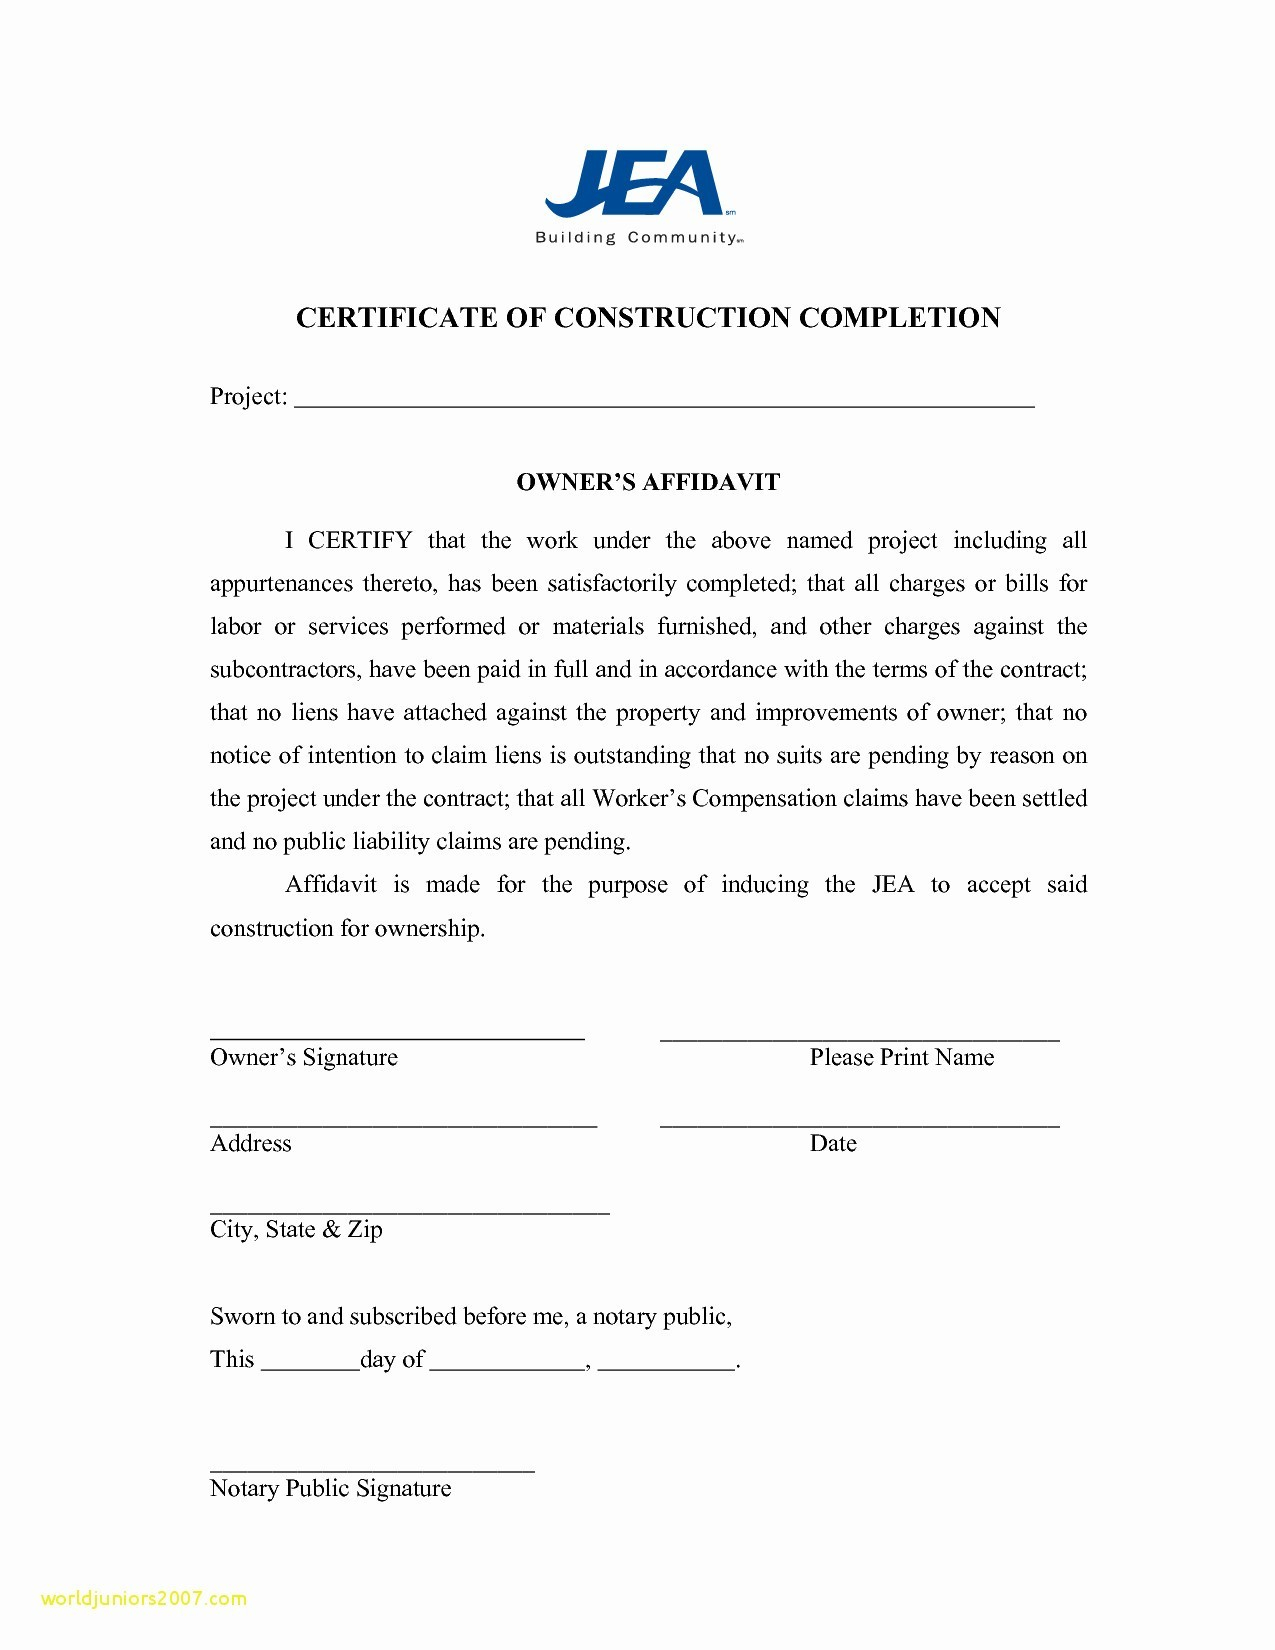 letter of substantial completion template Collection-Installation pletion Certificate Sample Fresh Practical Pletion Certificate Template Jct Choice Image Save Civil Work Pletion 13-m